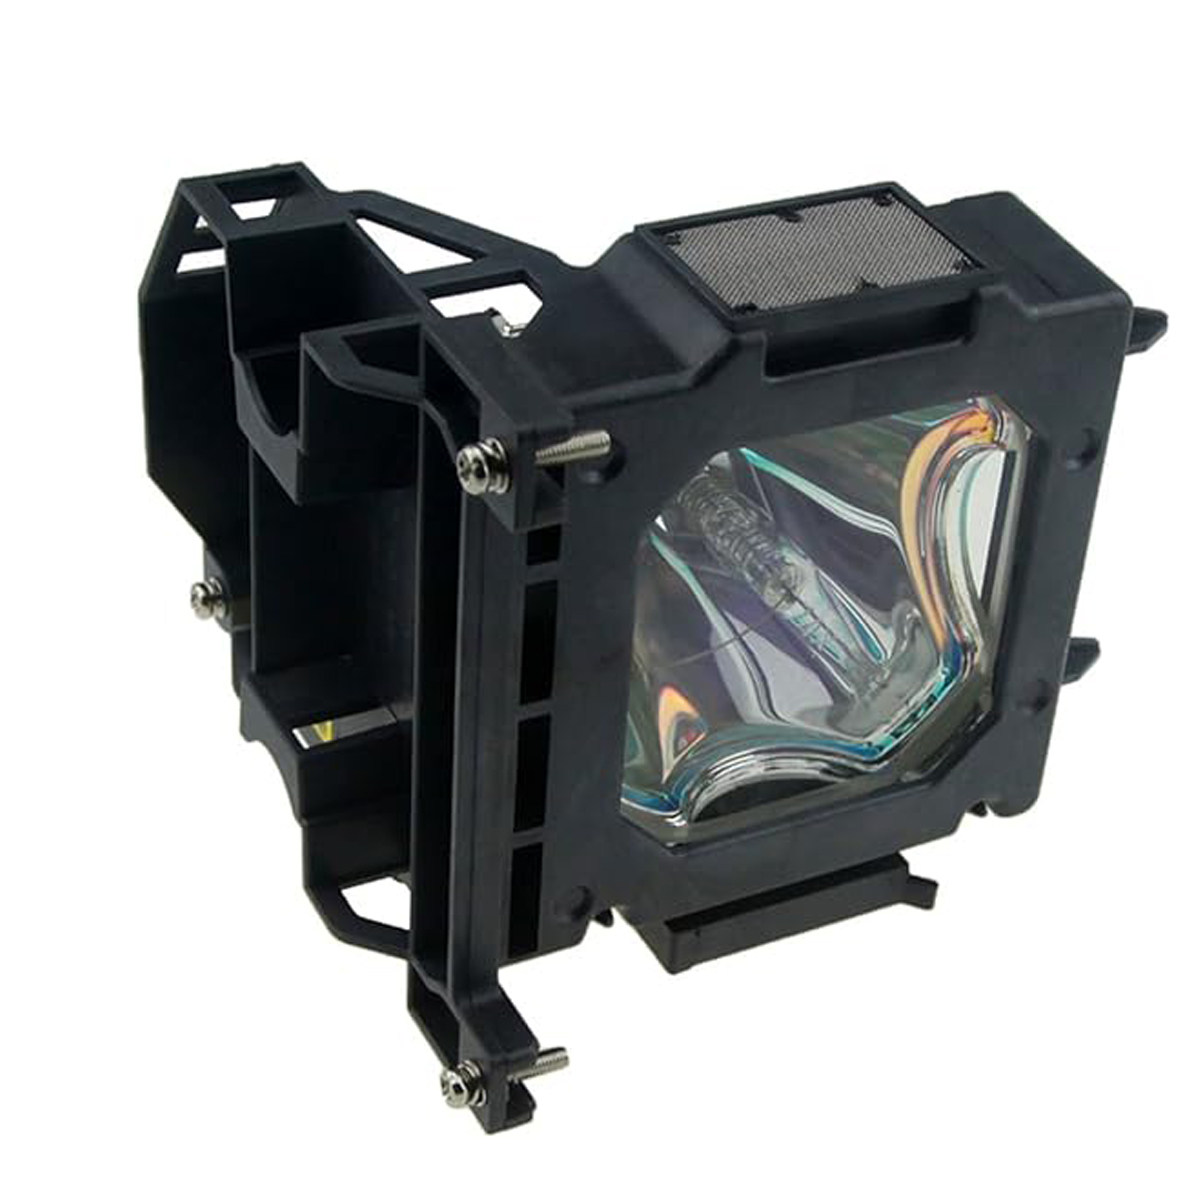 Replacement Projector lamp LMP-H202 For Sony VPL HW30ES VPL HW40ES VPL HW50ES VPL HW55ES